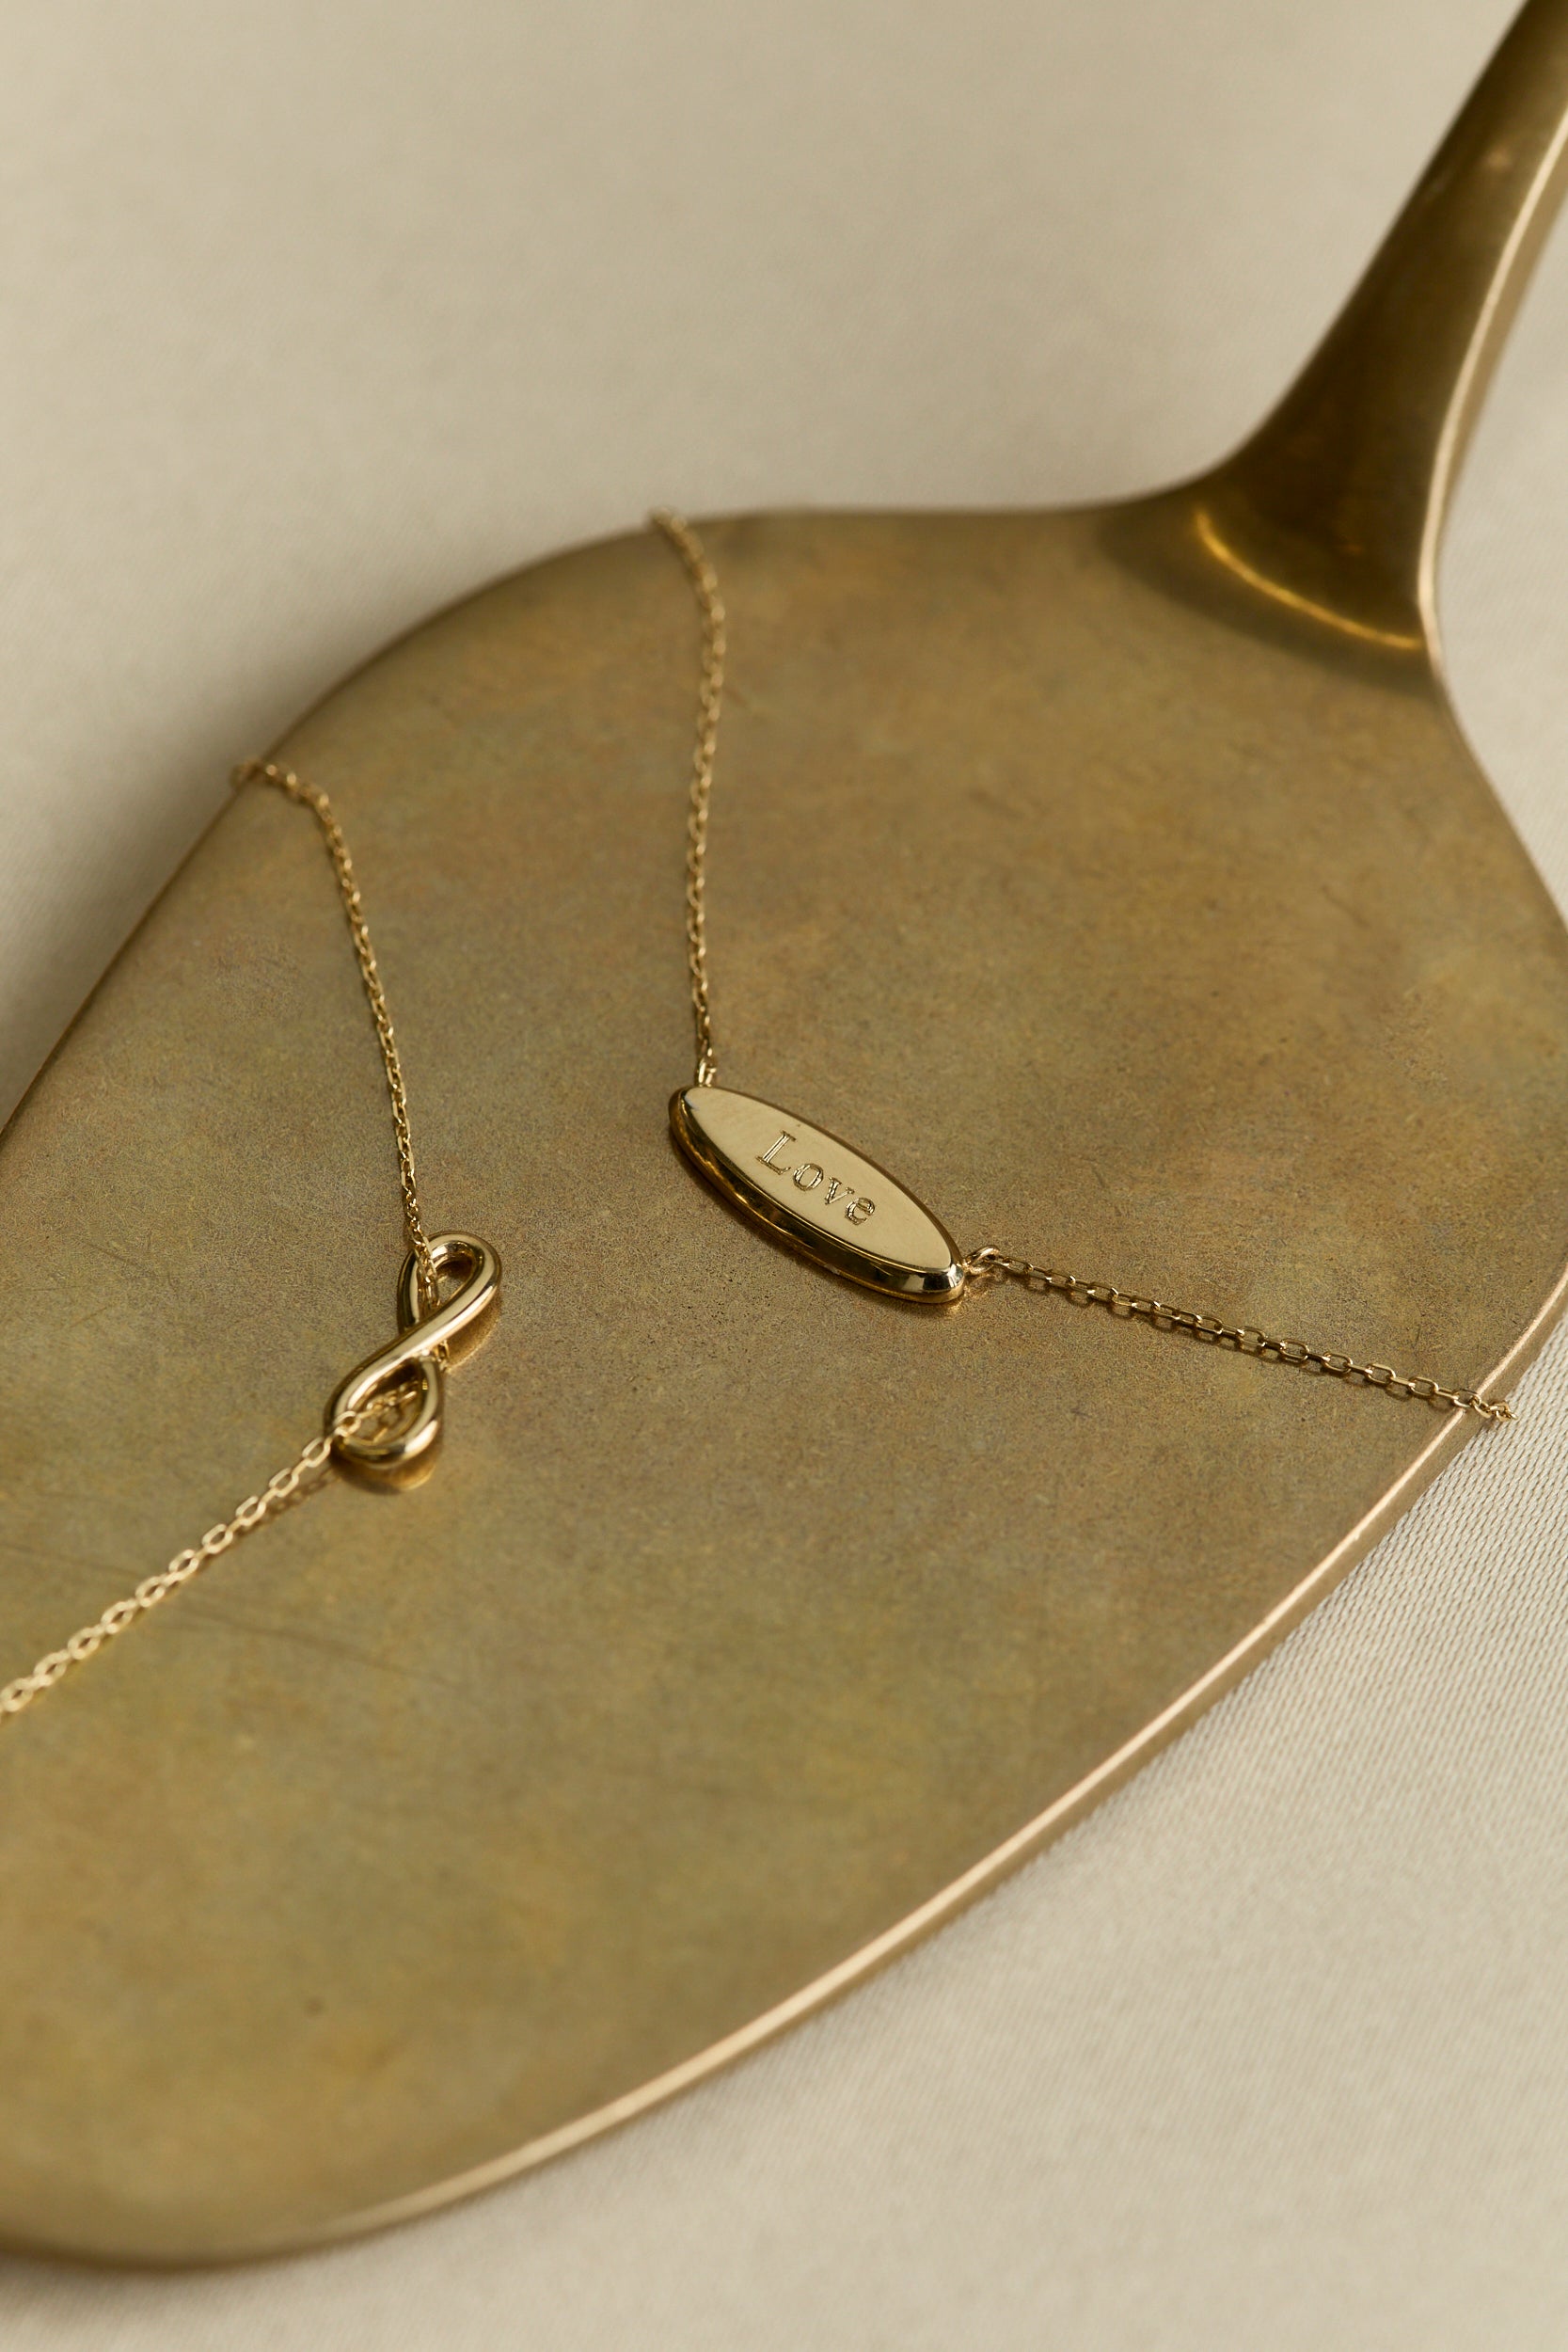 Personalised jewellery to engrave in 925 Sterling Silver and Gold Plated -  L'Atelier d'Amaya